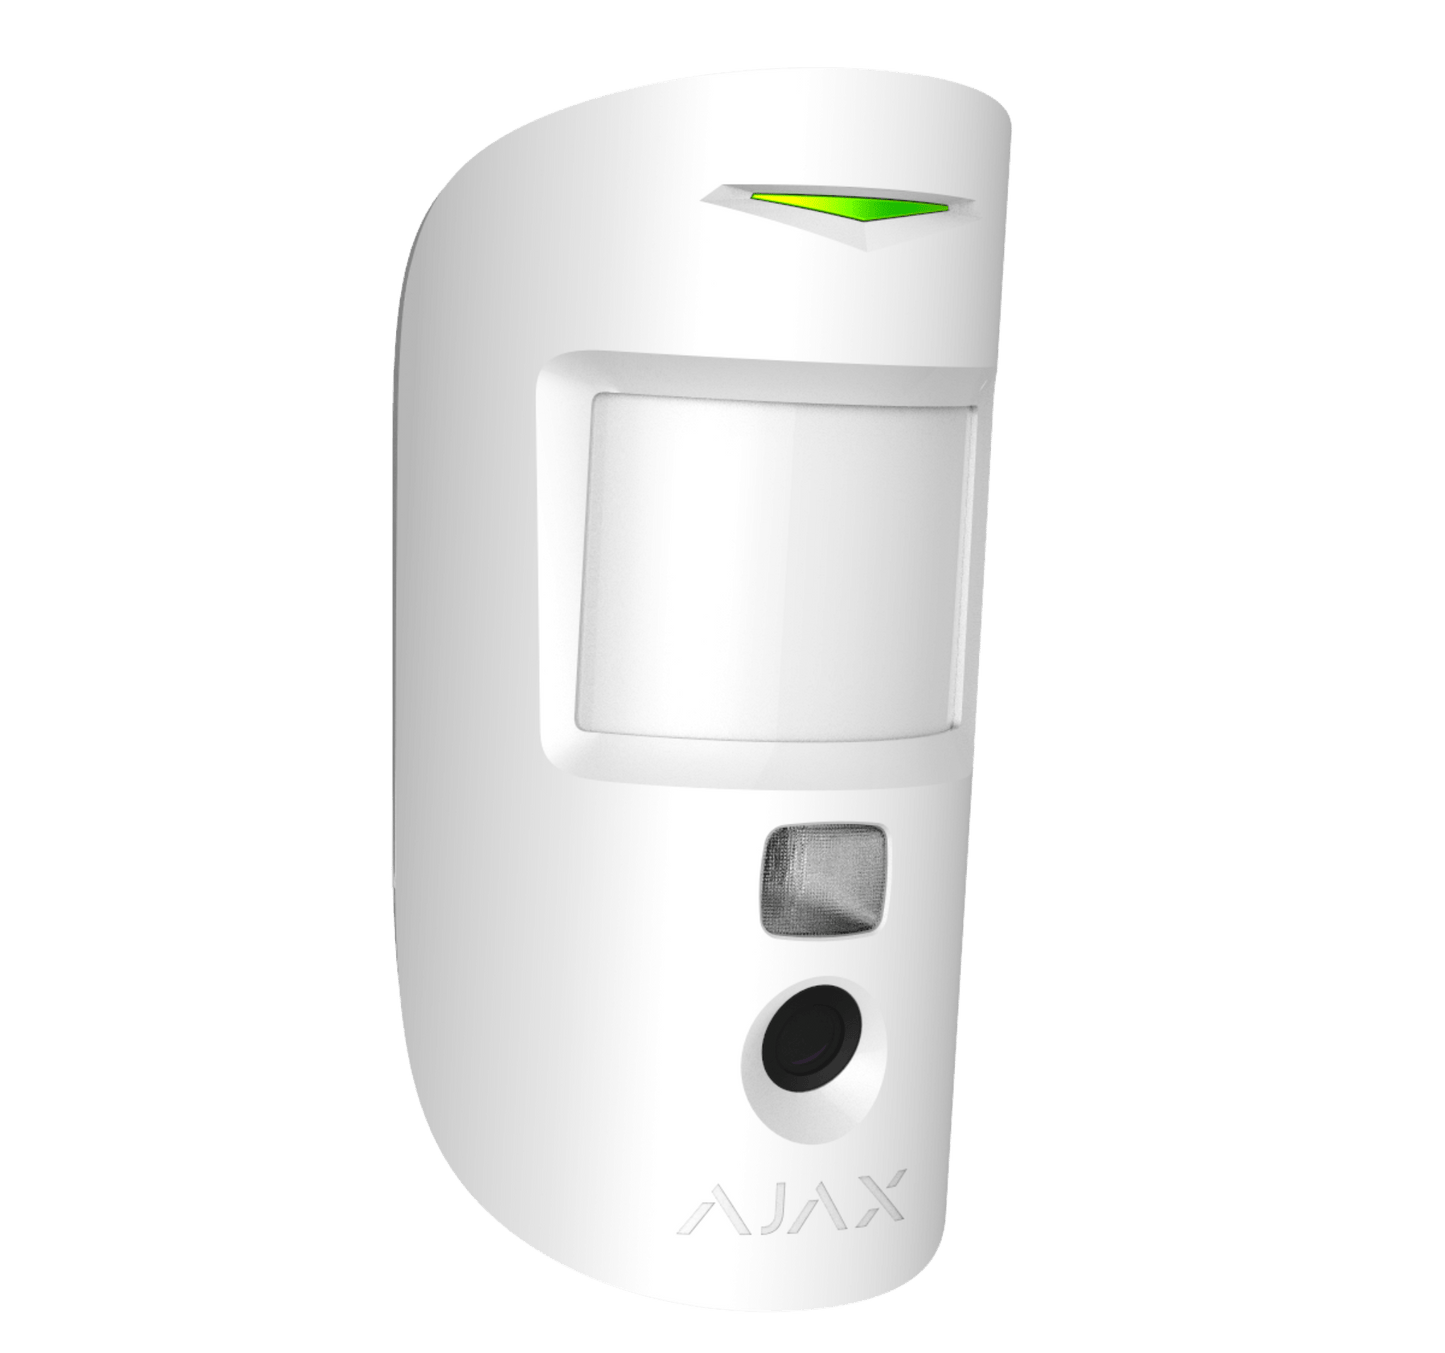 White Ajax MotionCam a wireless motion detector with a built in camera for home and business security, 110 × 65 × 50 mm in size, 86 grams in weight. turned view of device